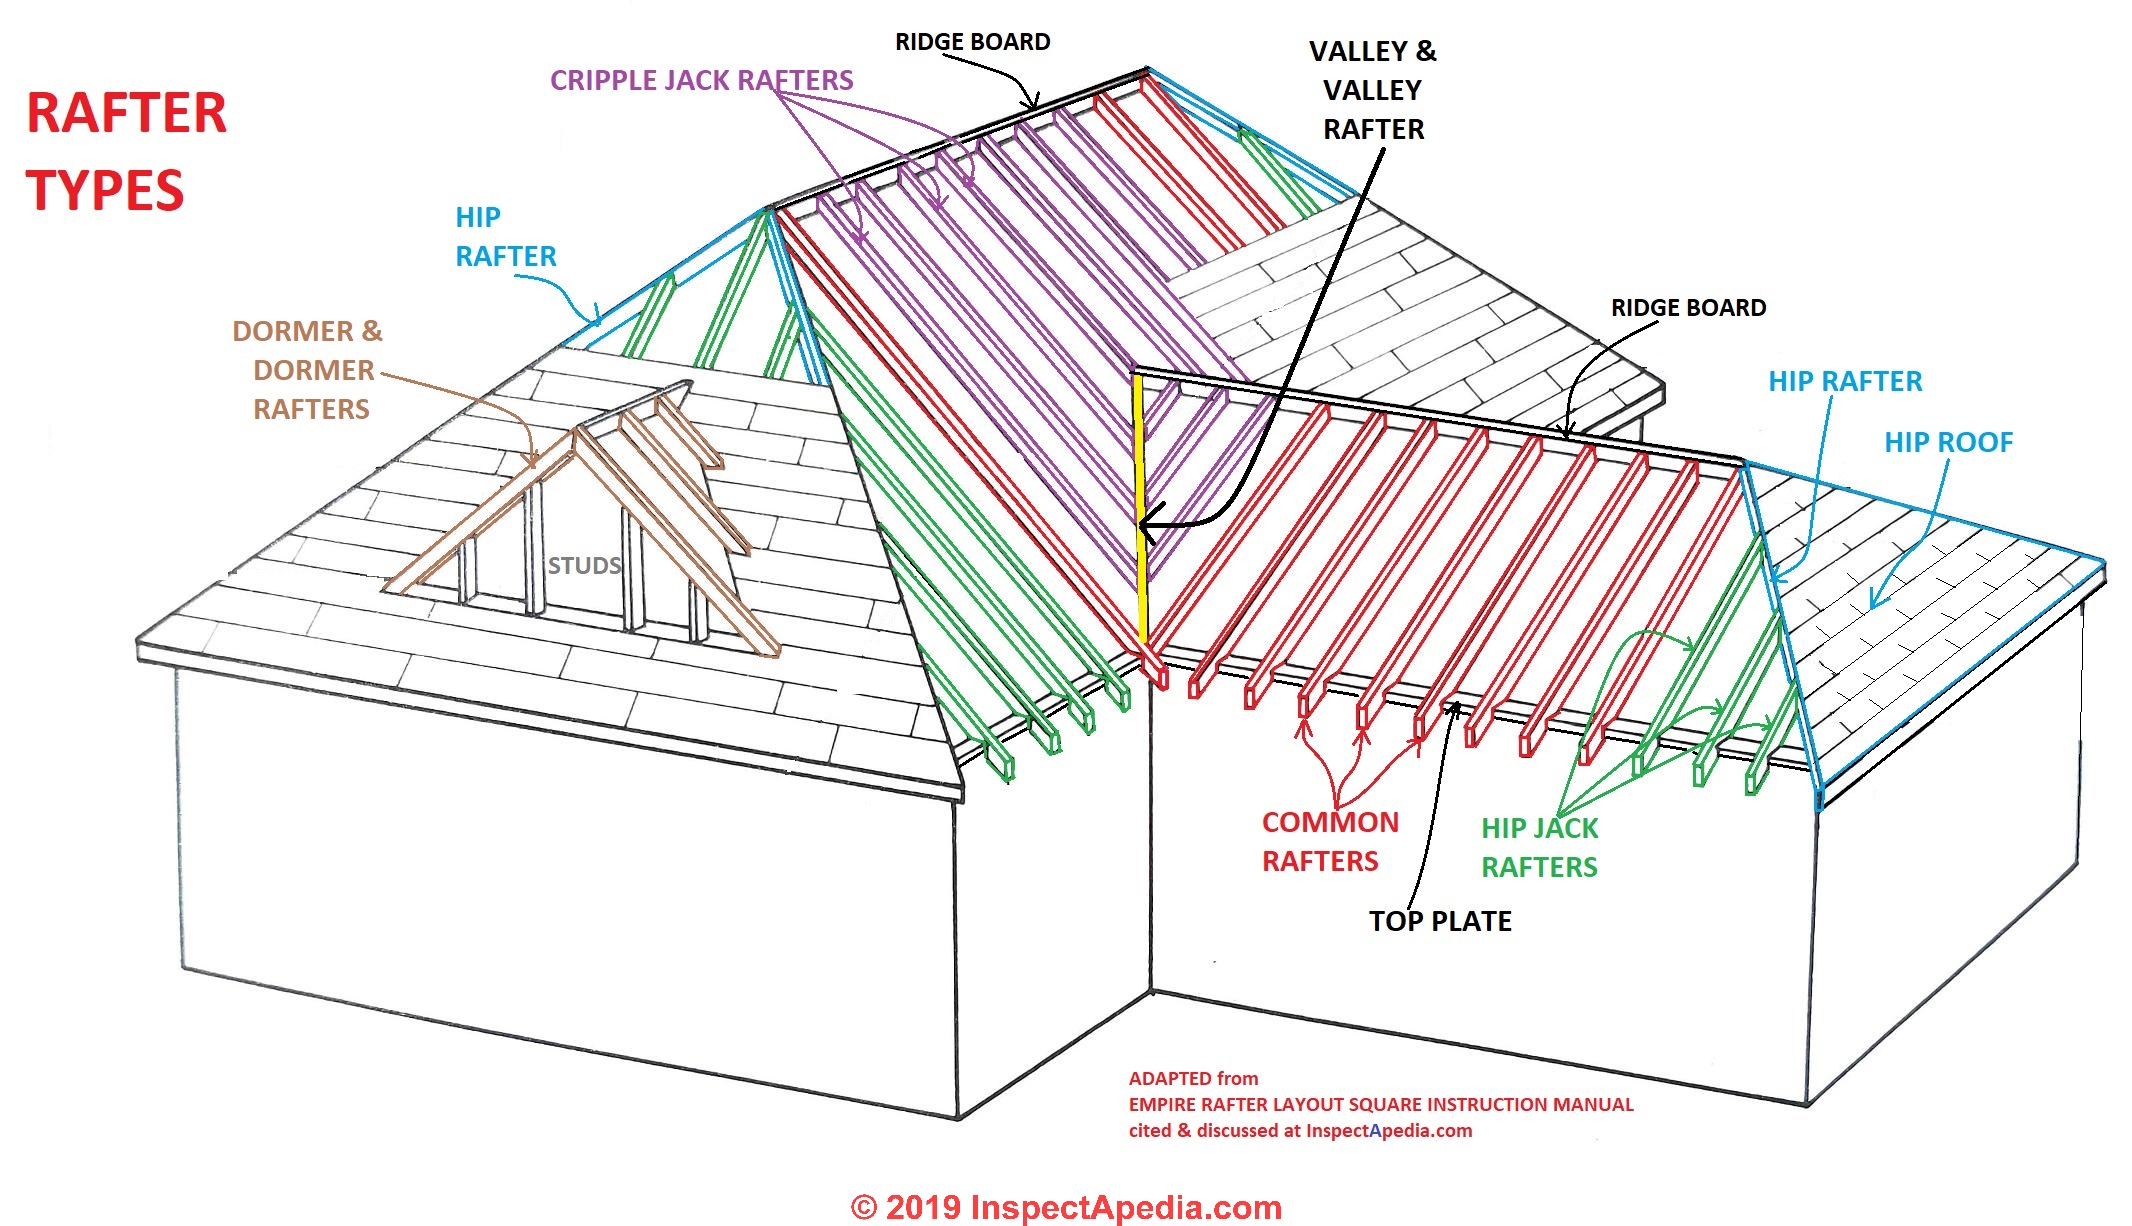 Roof Framing Definition Of Types Of Rafters Definition Of Collar Ties Rafter Ties Structural Ridge Beams Causes Of Roof Collapse Wall Spread